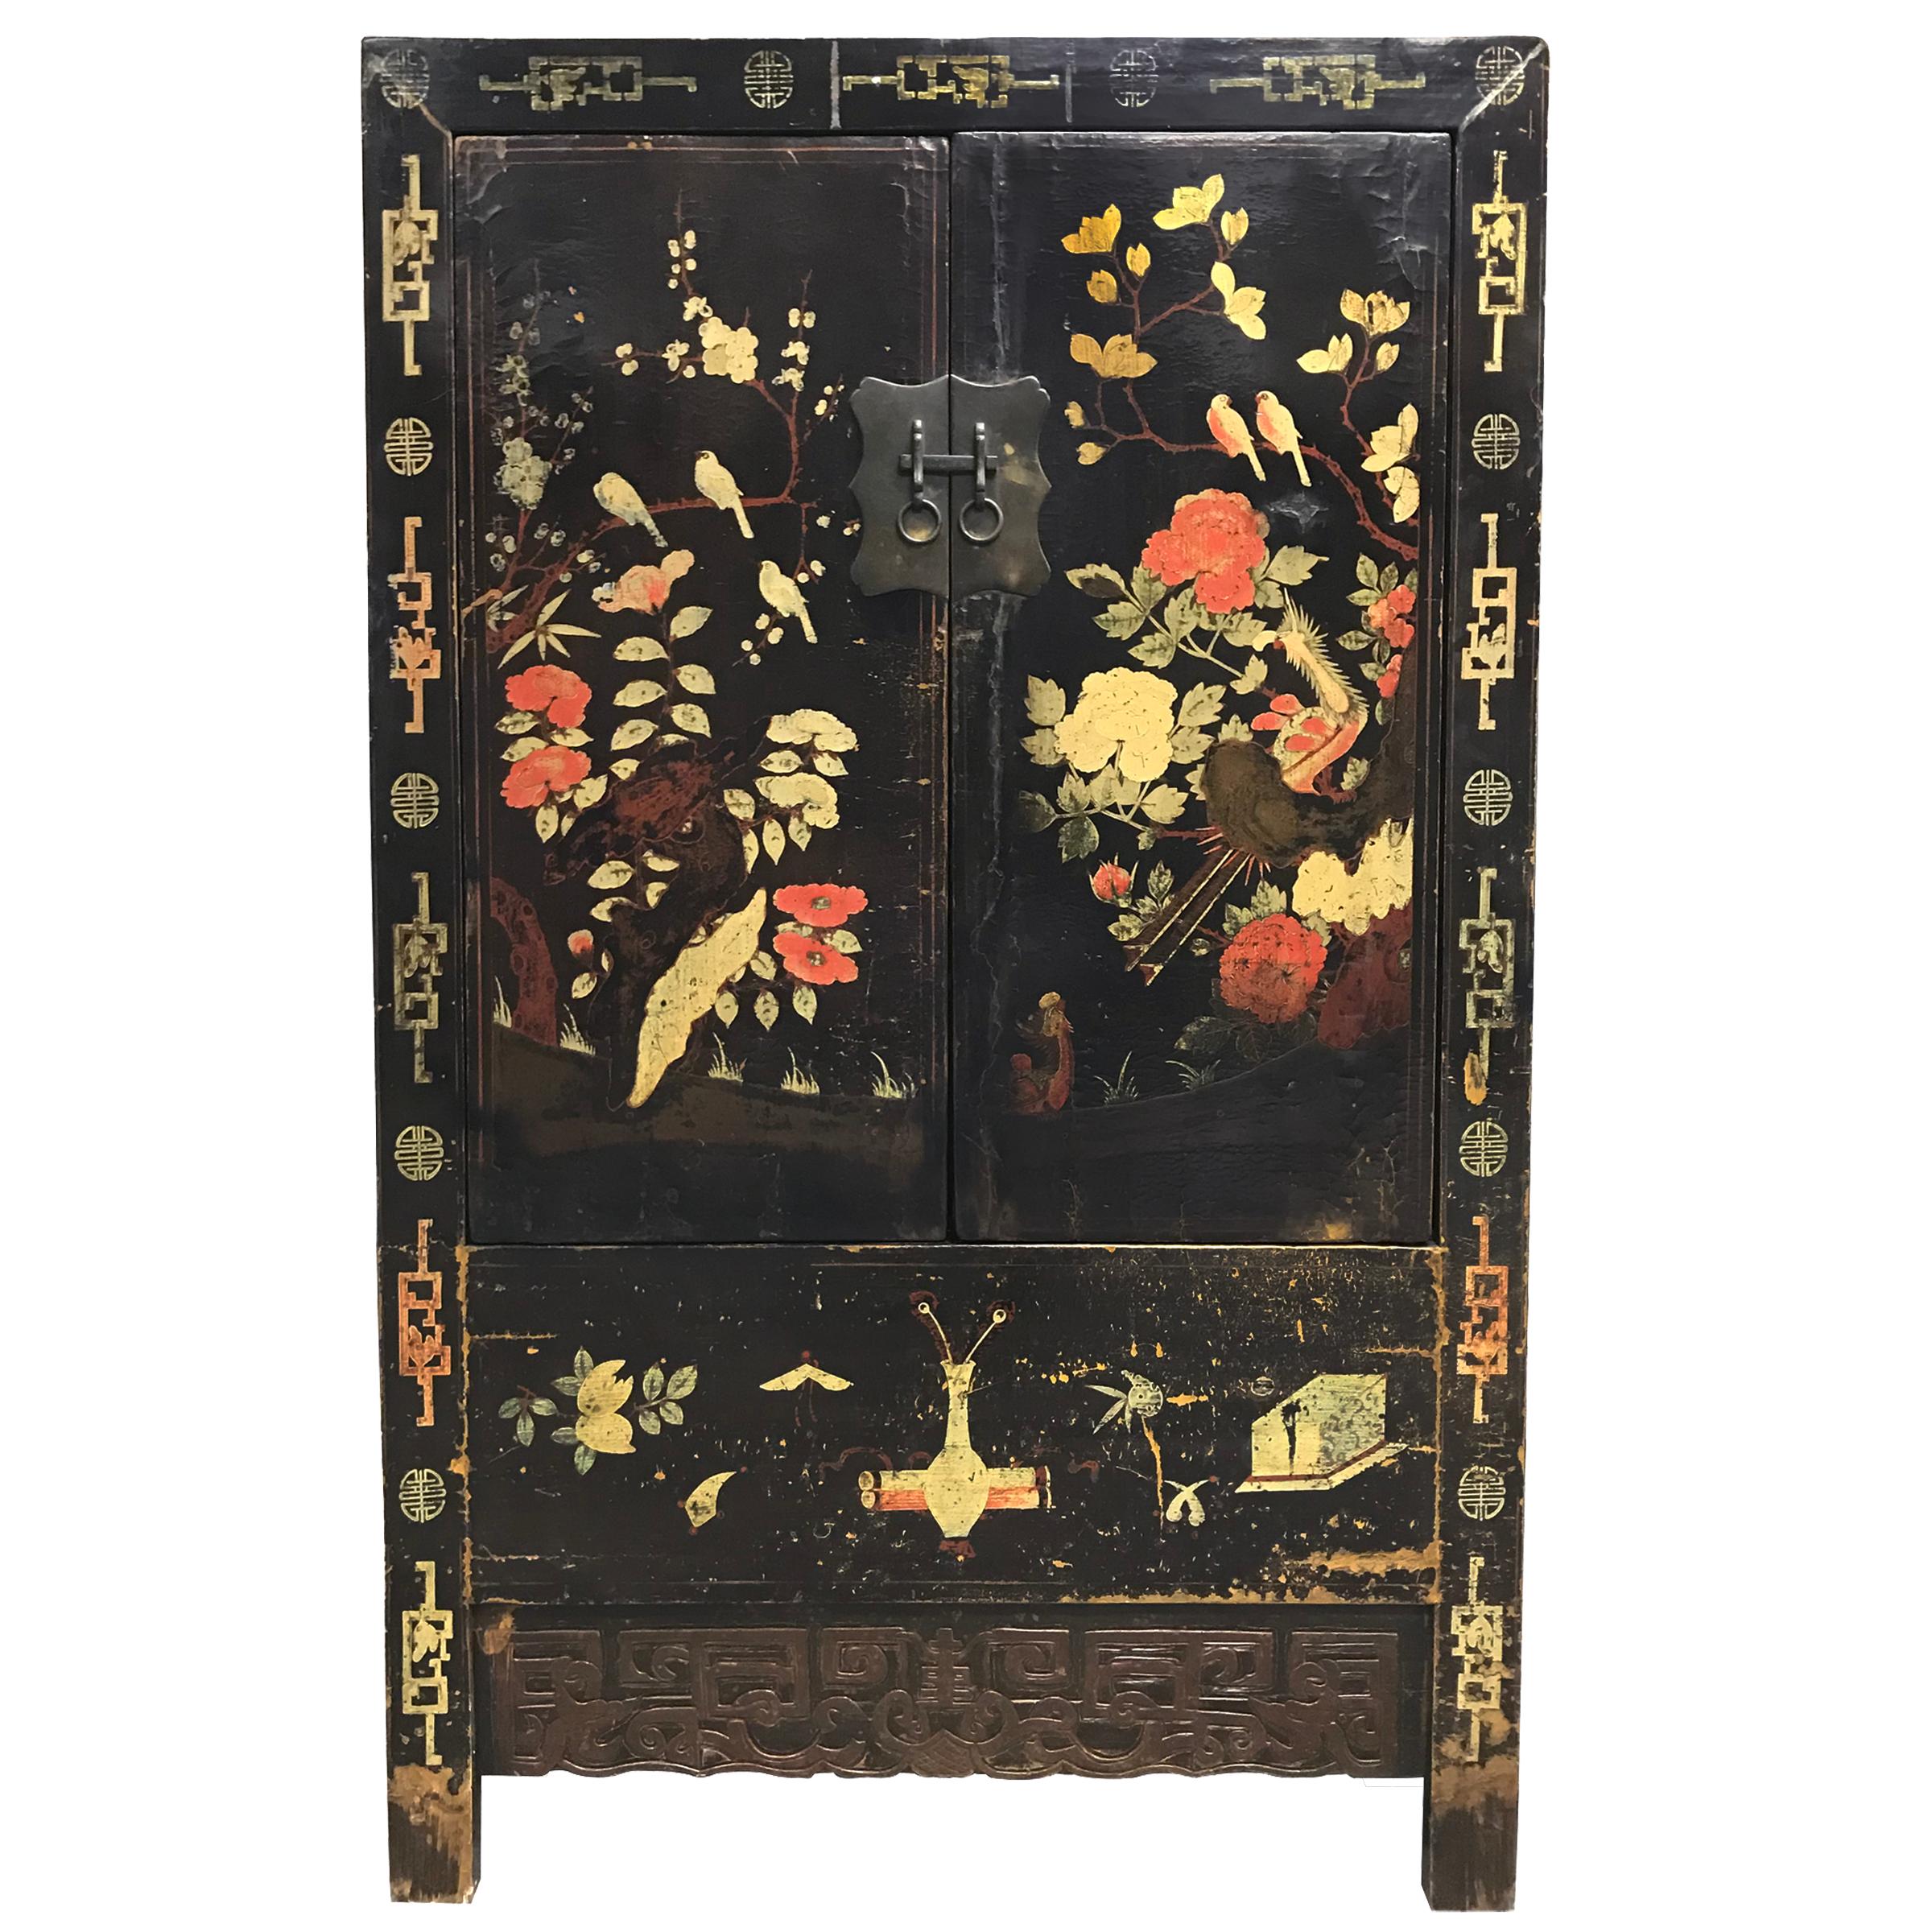 A wonderful pair of 19th century Chinese cabinet with a heavy black lacquer and beautifully painted garden scenes depicting myriad birds including cranes, phoenix, magpies, and ducks amidst a lush landscape of auspicious flowers including peonies,